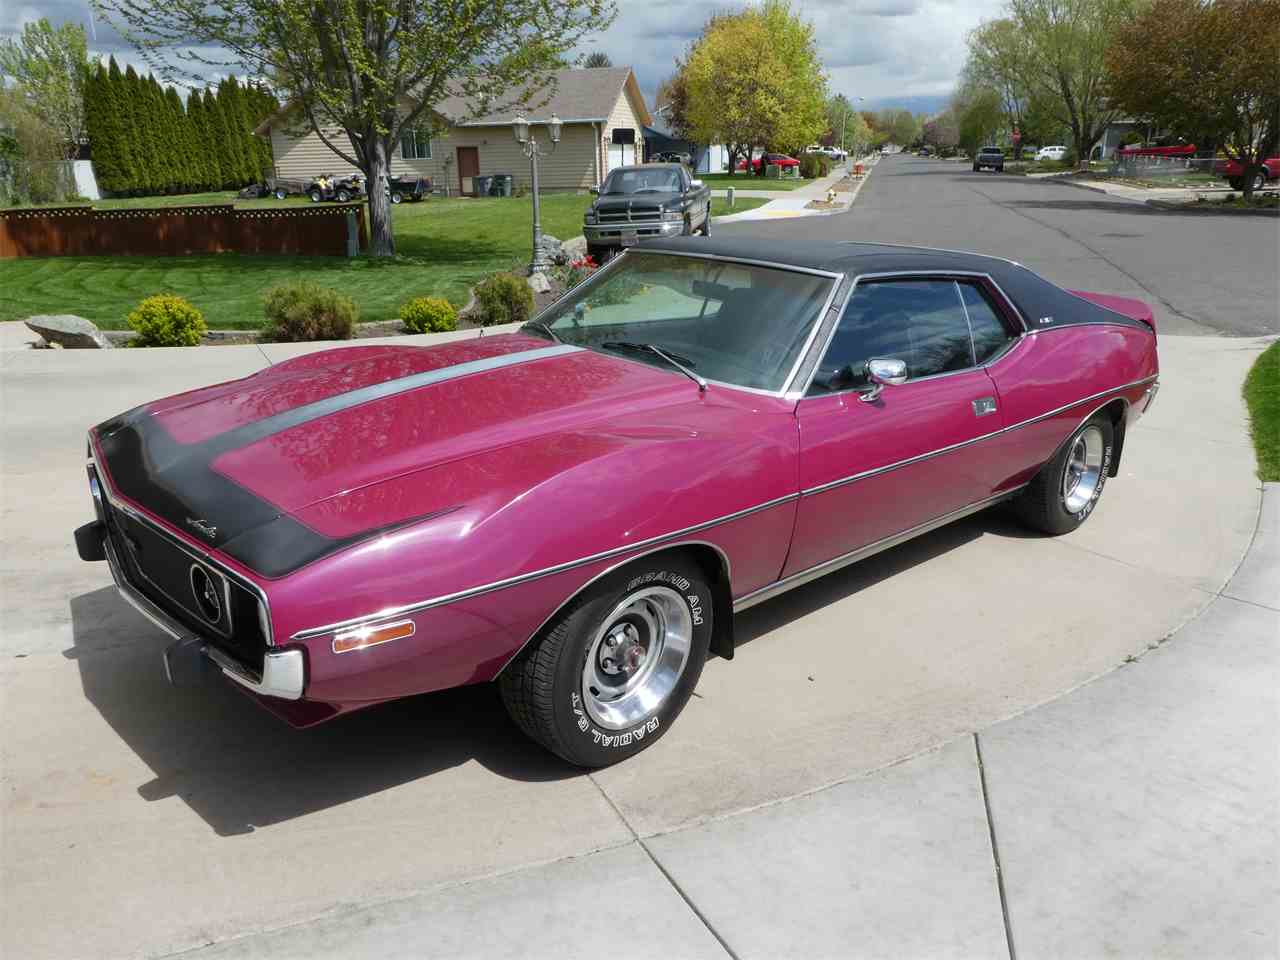 The 12+  Reasons for  Amc Javelin For Sale On Craigslist: Used amc javelin for sale & salvage auction.